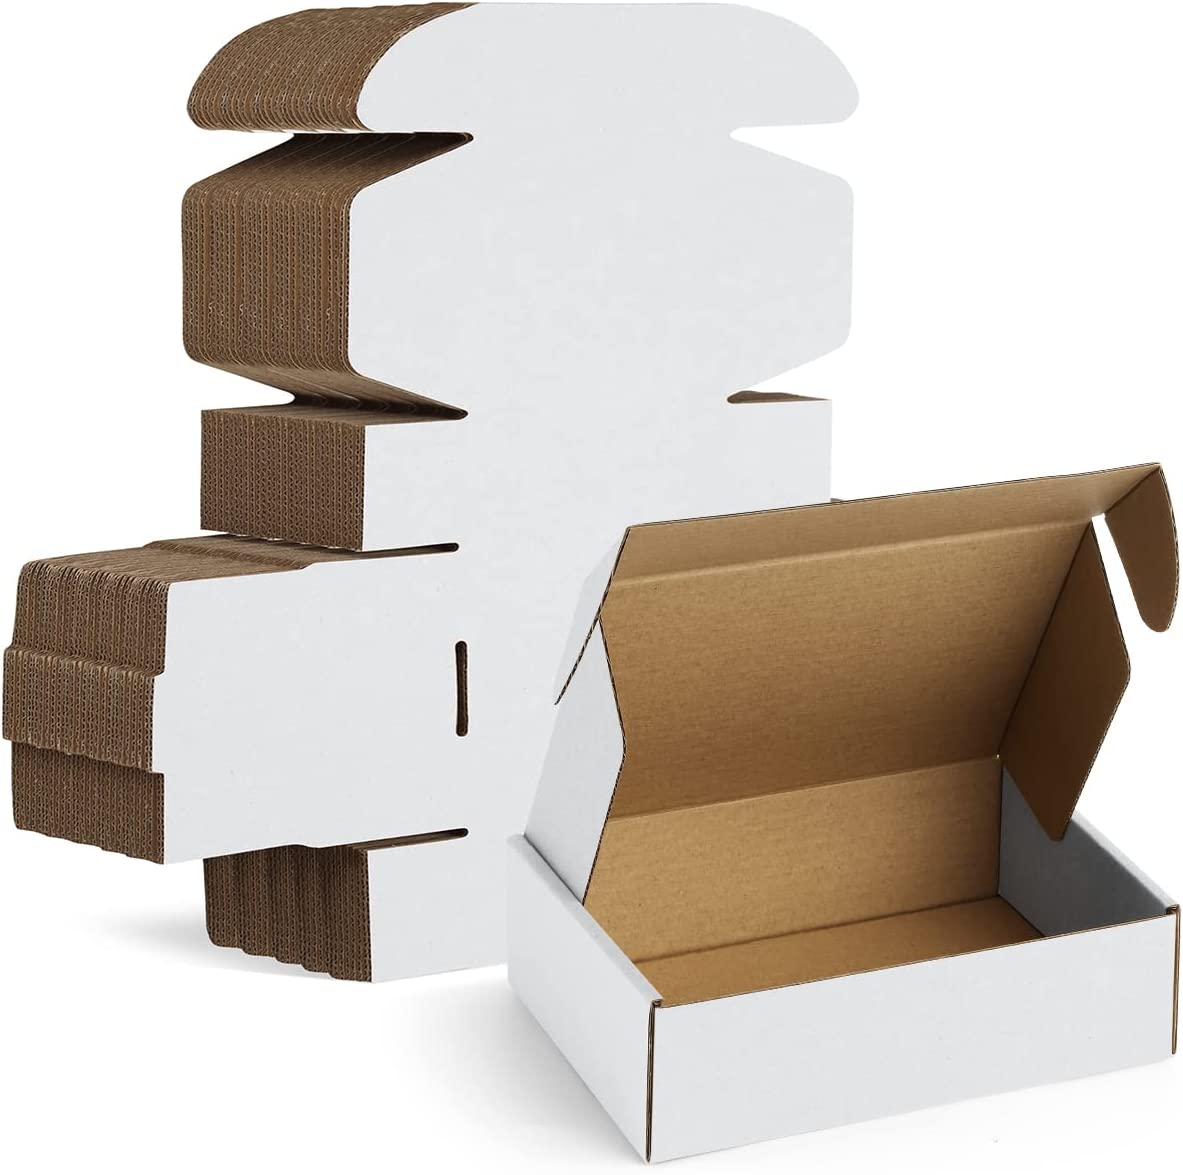  Soxuding Small Shipping Boxes For Small Business Hawaiian  Flower Floral 25 Pack, 6x6x2in Recyclable Small Cardboard Boxes For  Packaging Shipping Boxes Corrugated Mailer Mailing Packing Gift Boxes :  Office Products